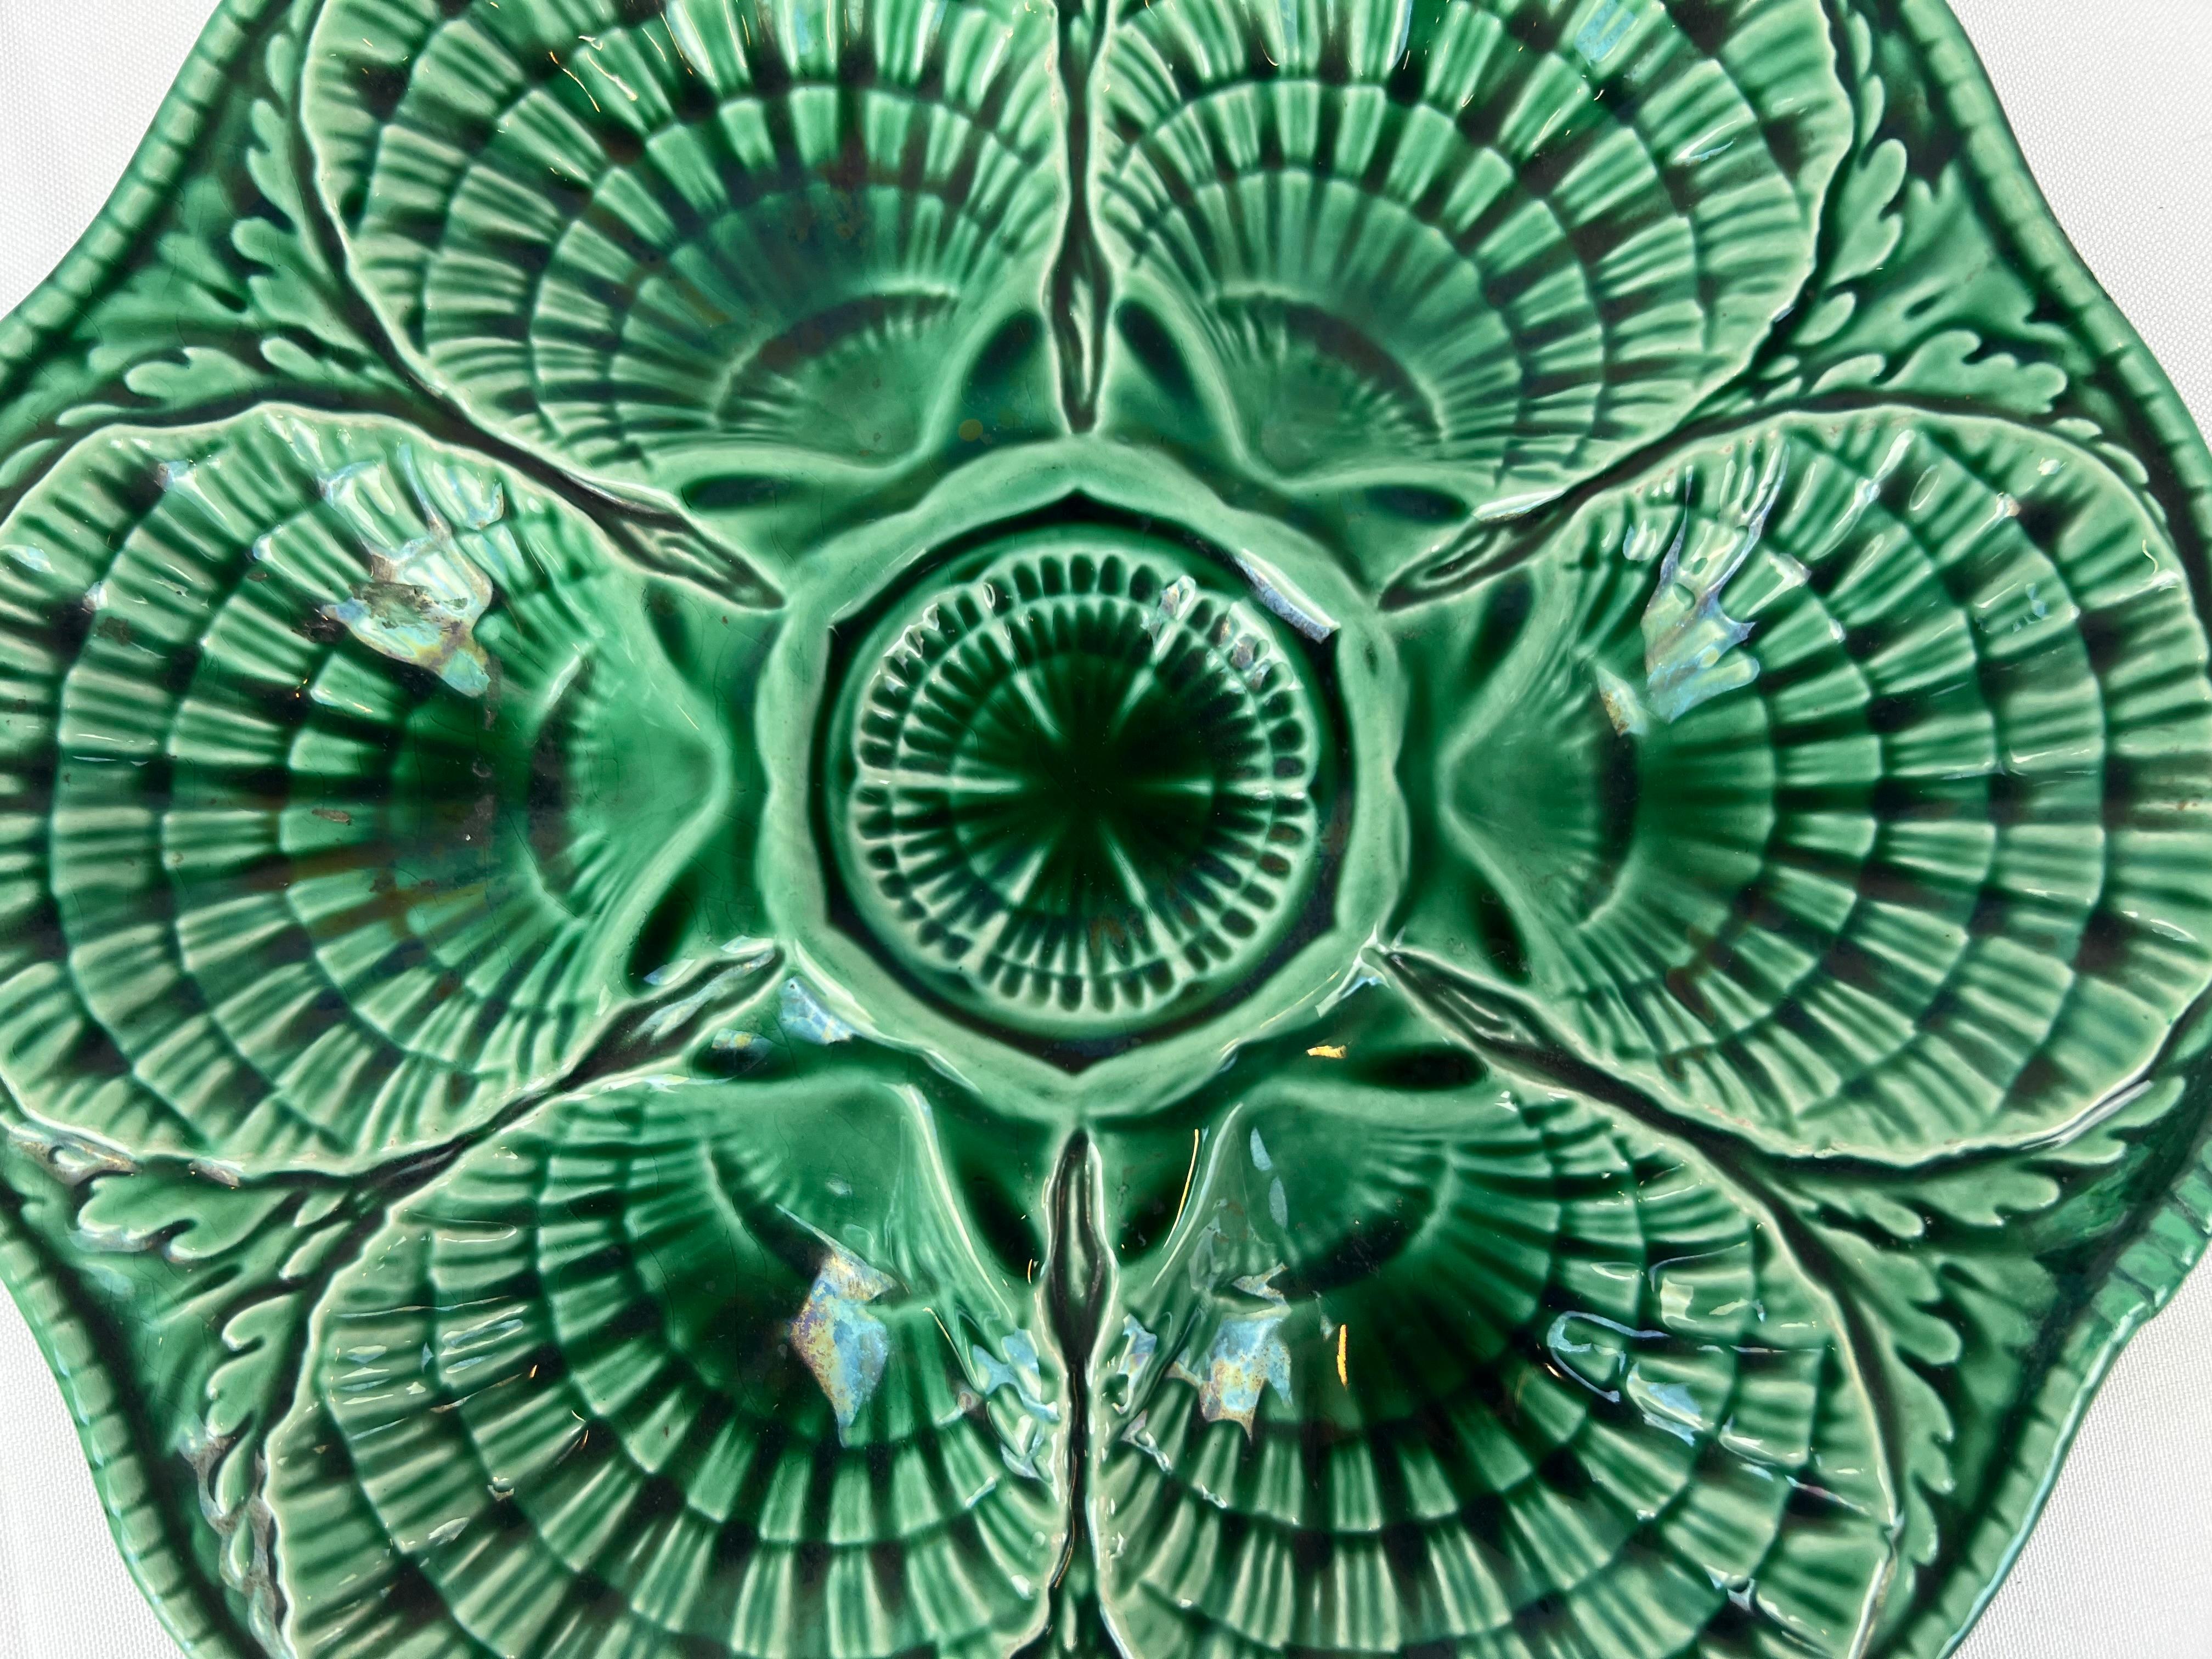 Belle Époque Green Majolica oyster plate by Sarreguemines, France